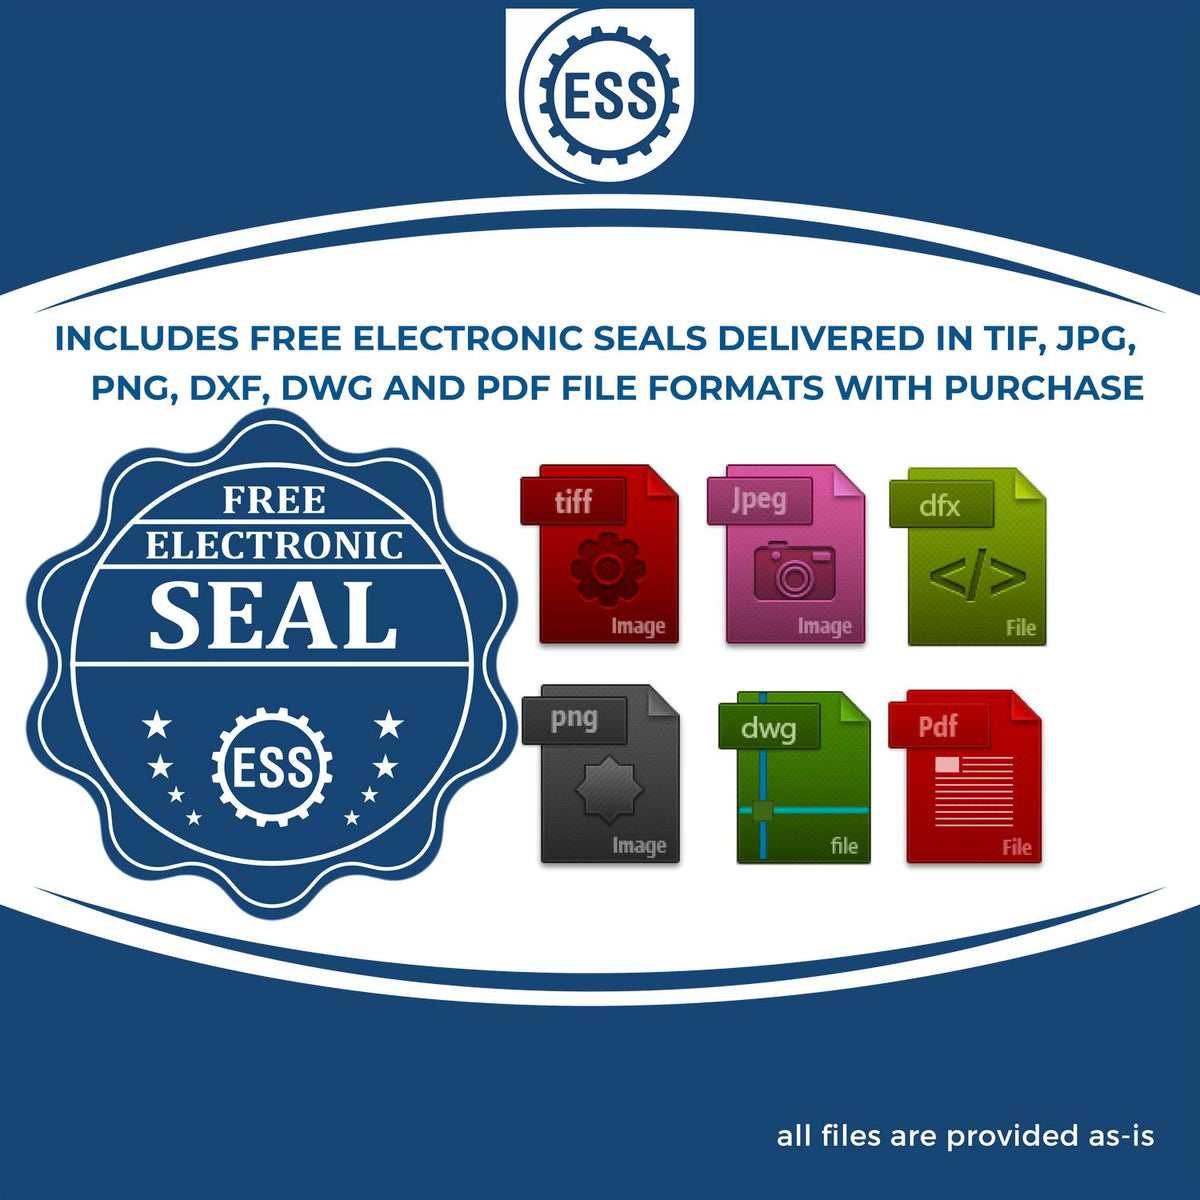 An infographic for the free electronic seal for the Gift Wyoming Engineer Seal illustrating the different file type icons such as DXF, DWG, TIF, JPG and PNG.